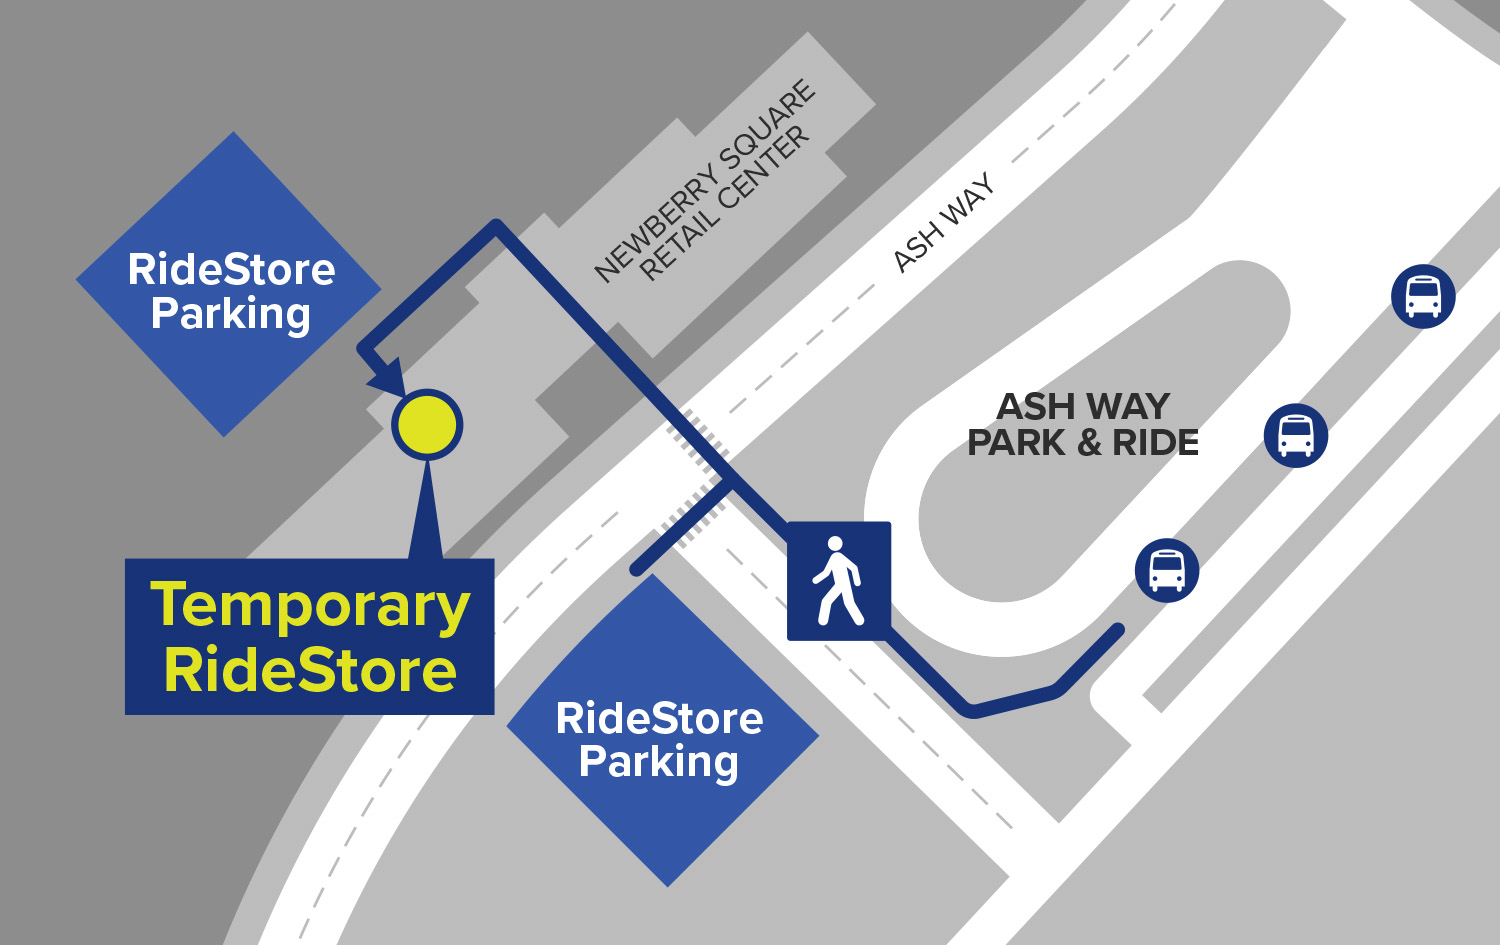 Map of the Community Transit RideStore location at Ash Way Park & Ride